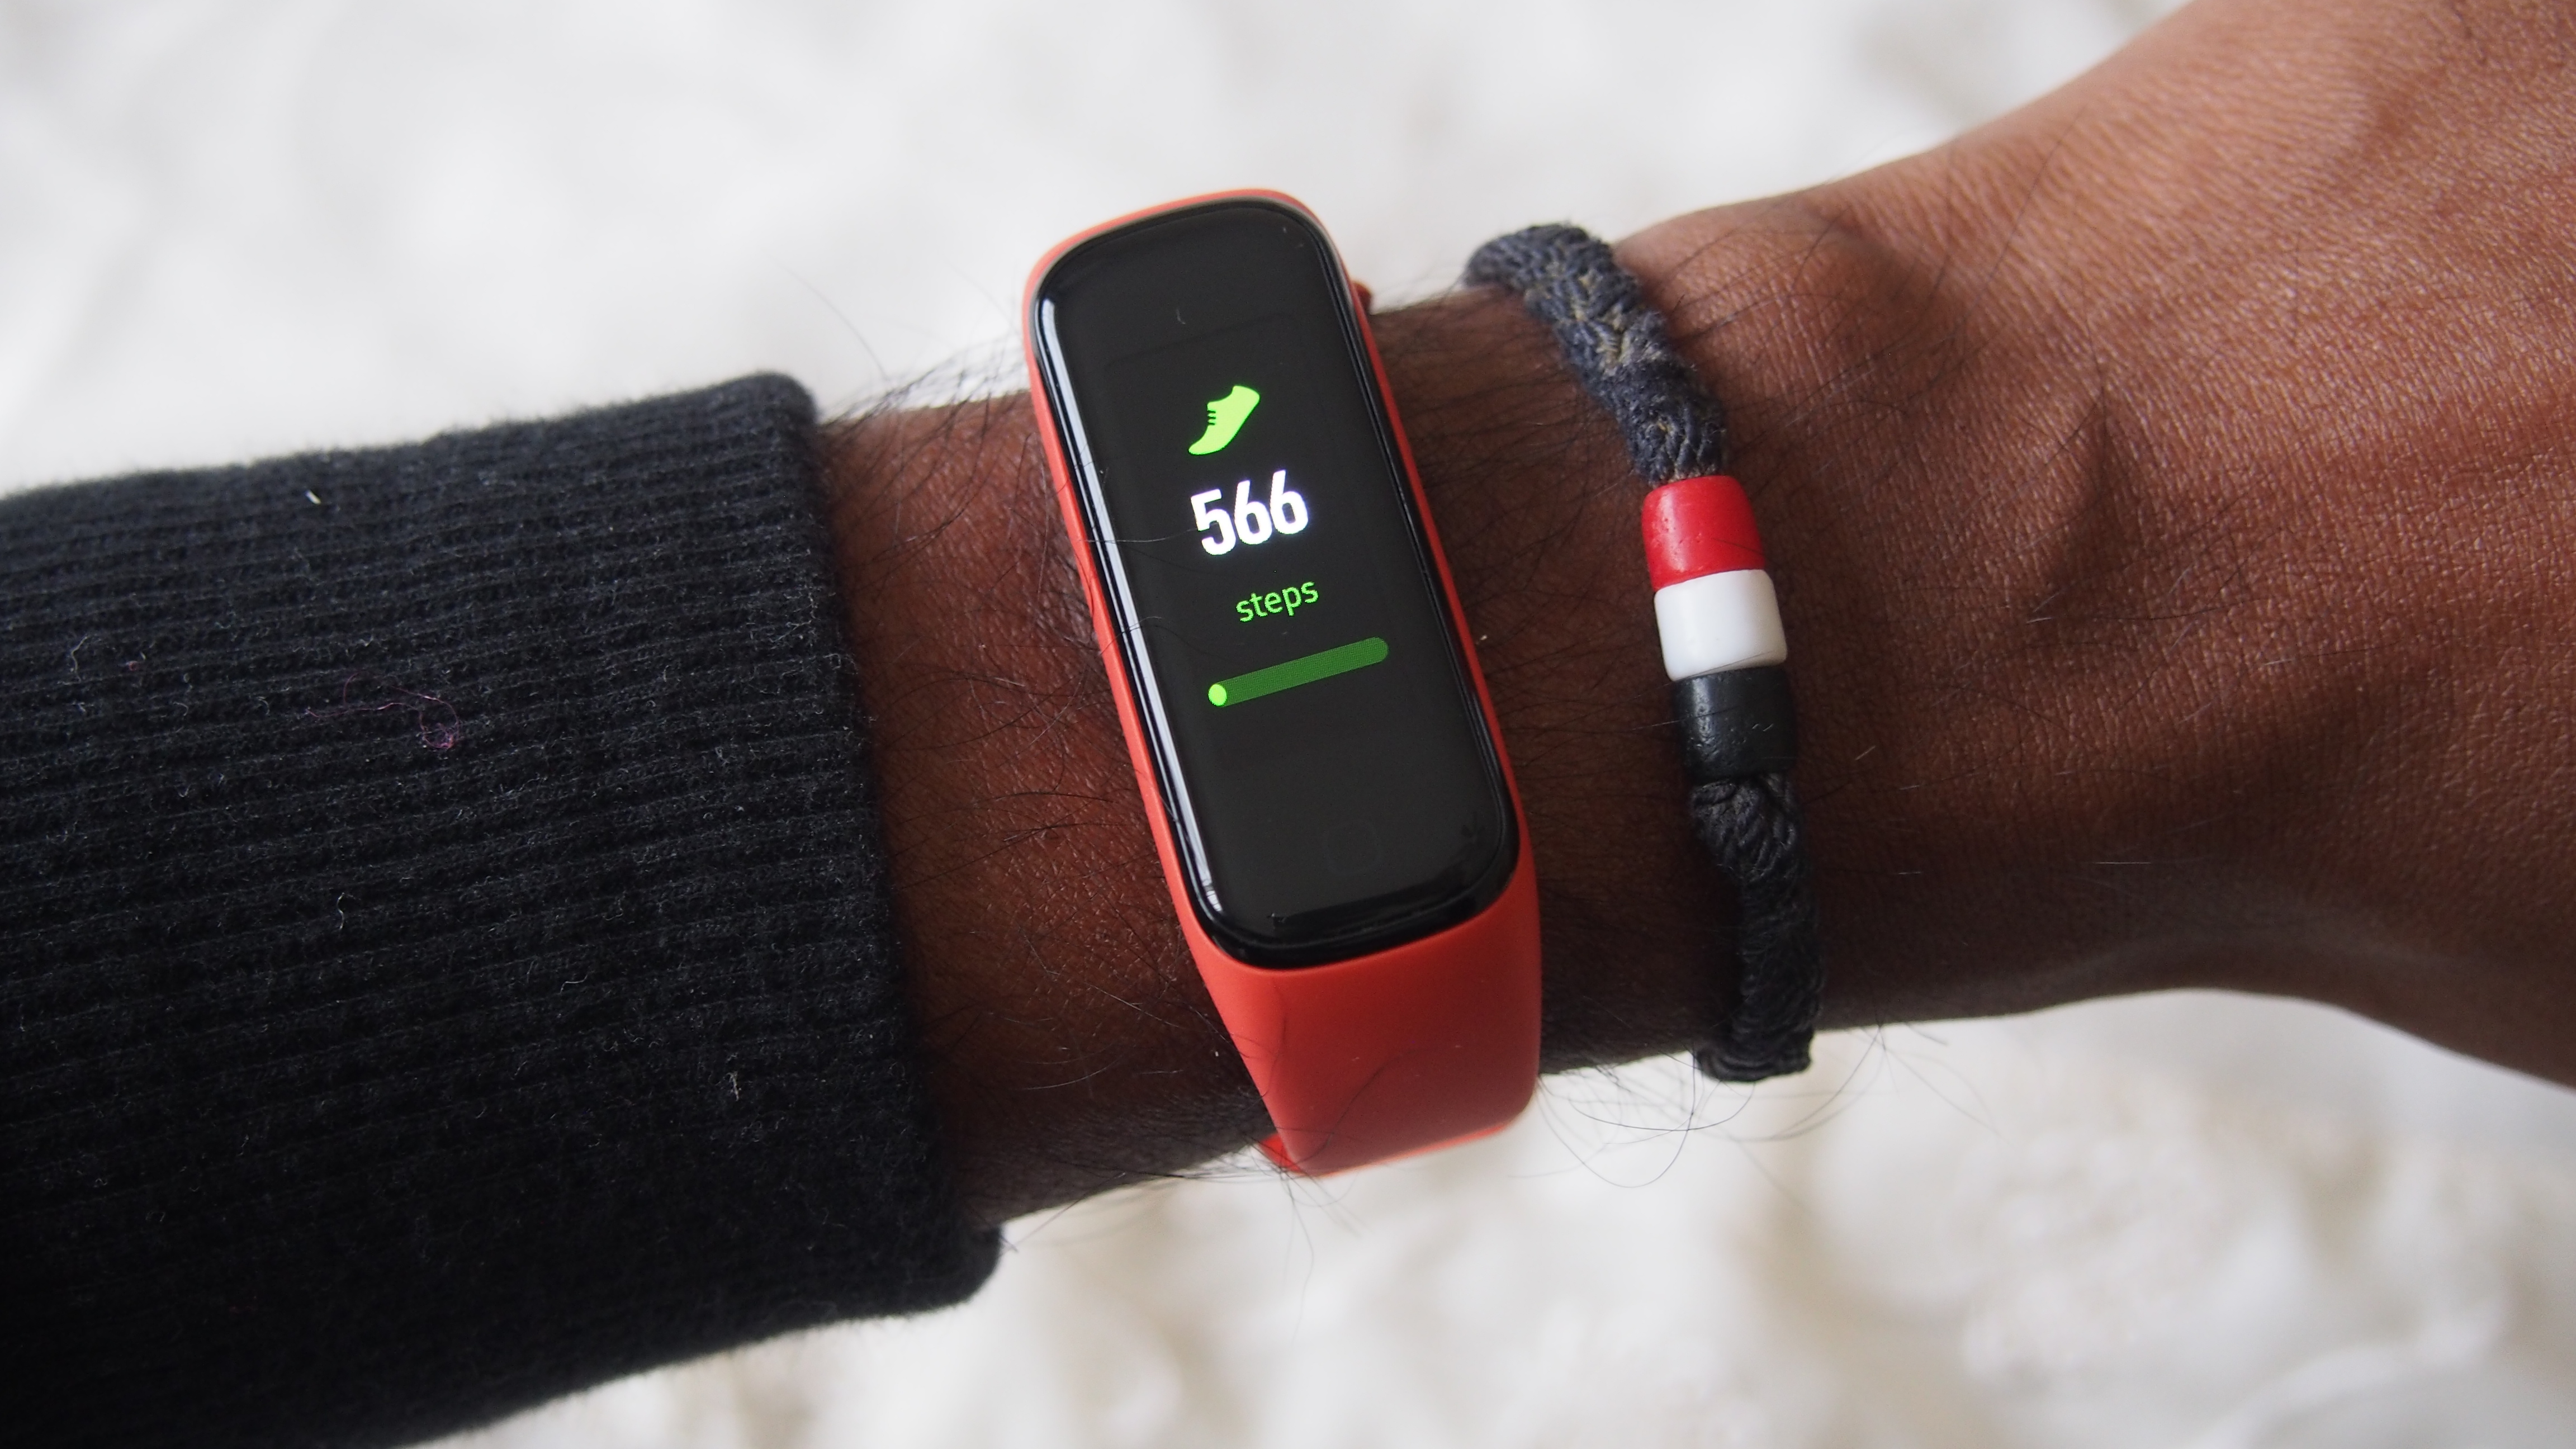 A Samsung Galaxy Fit 2 displaying a step count, worn on someone's wrist